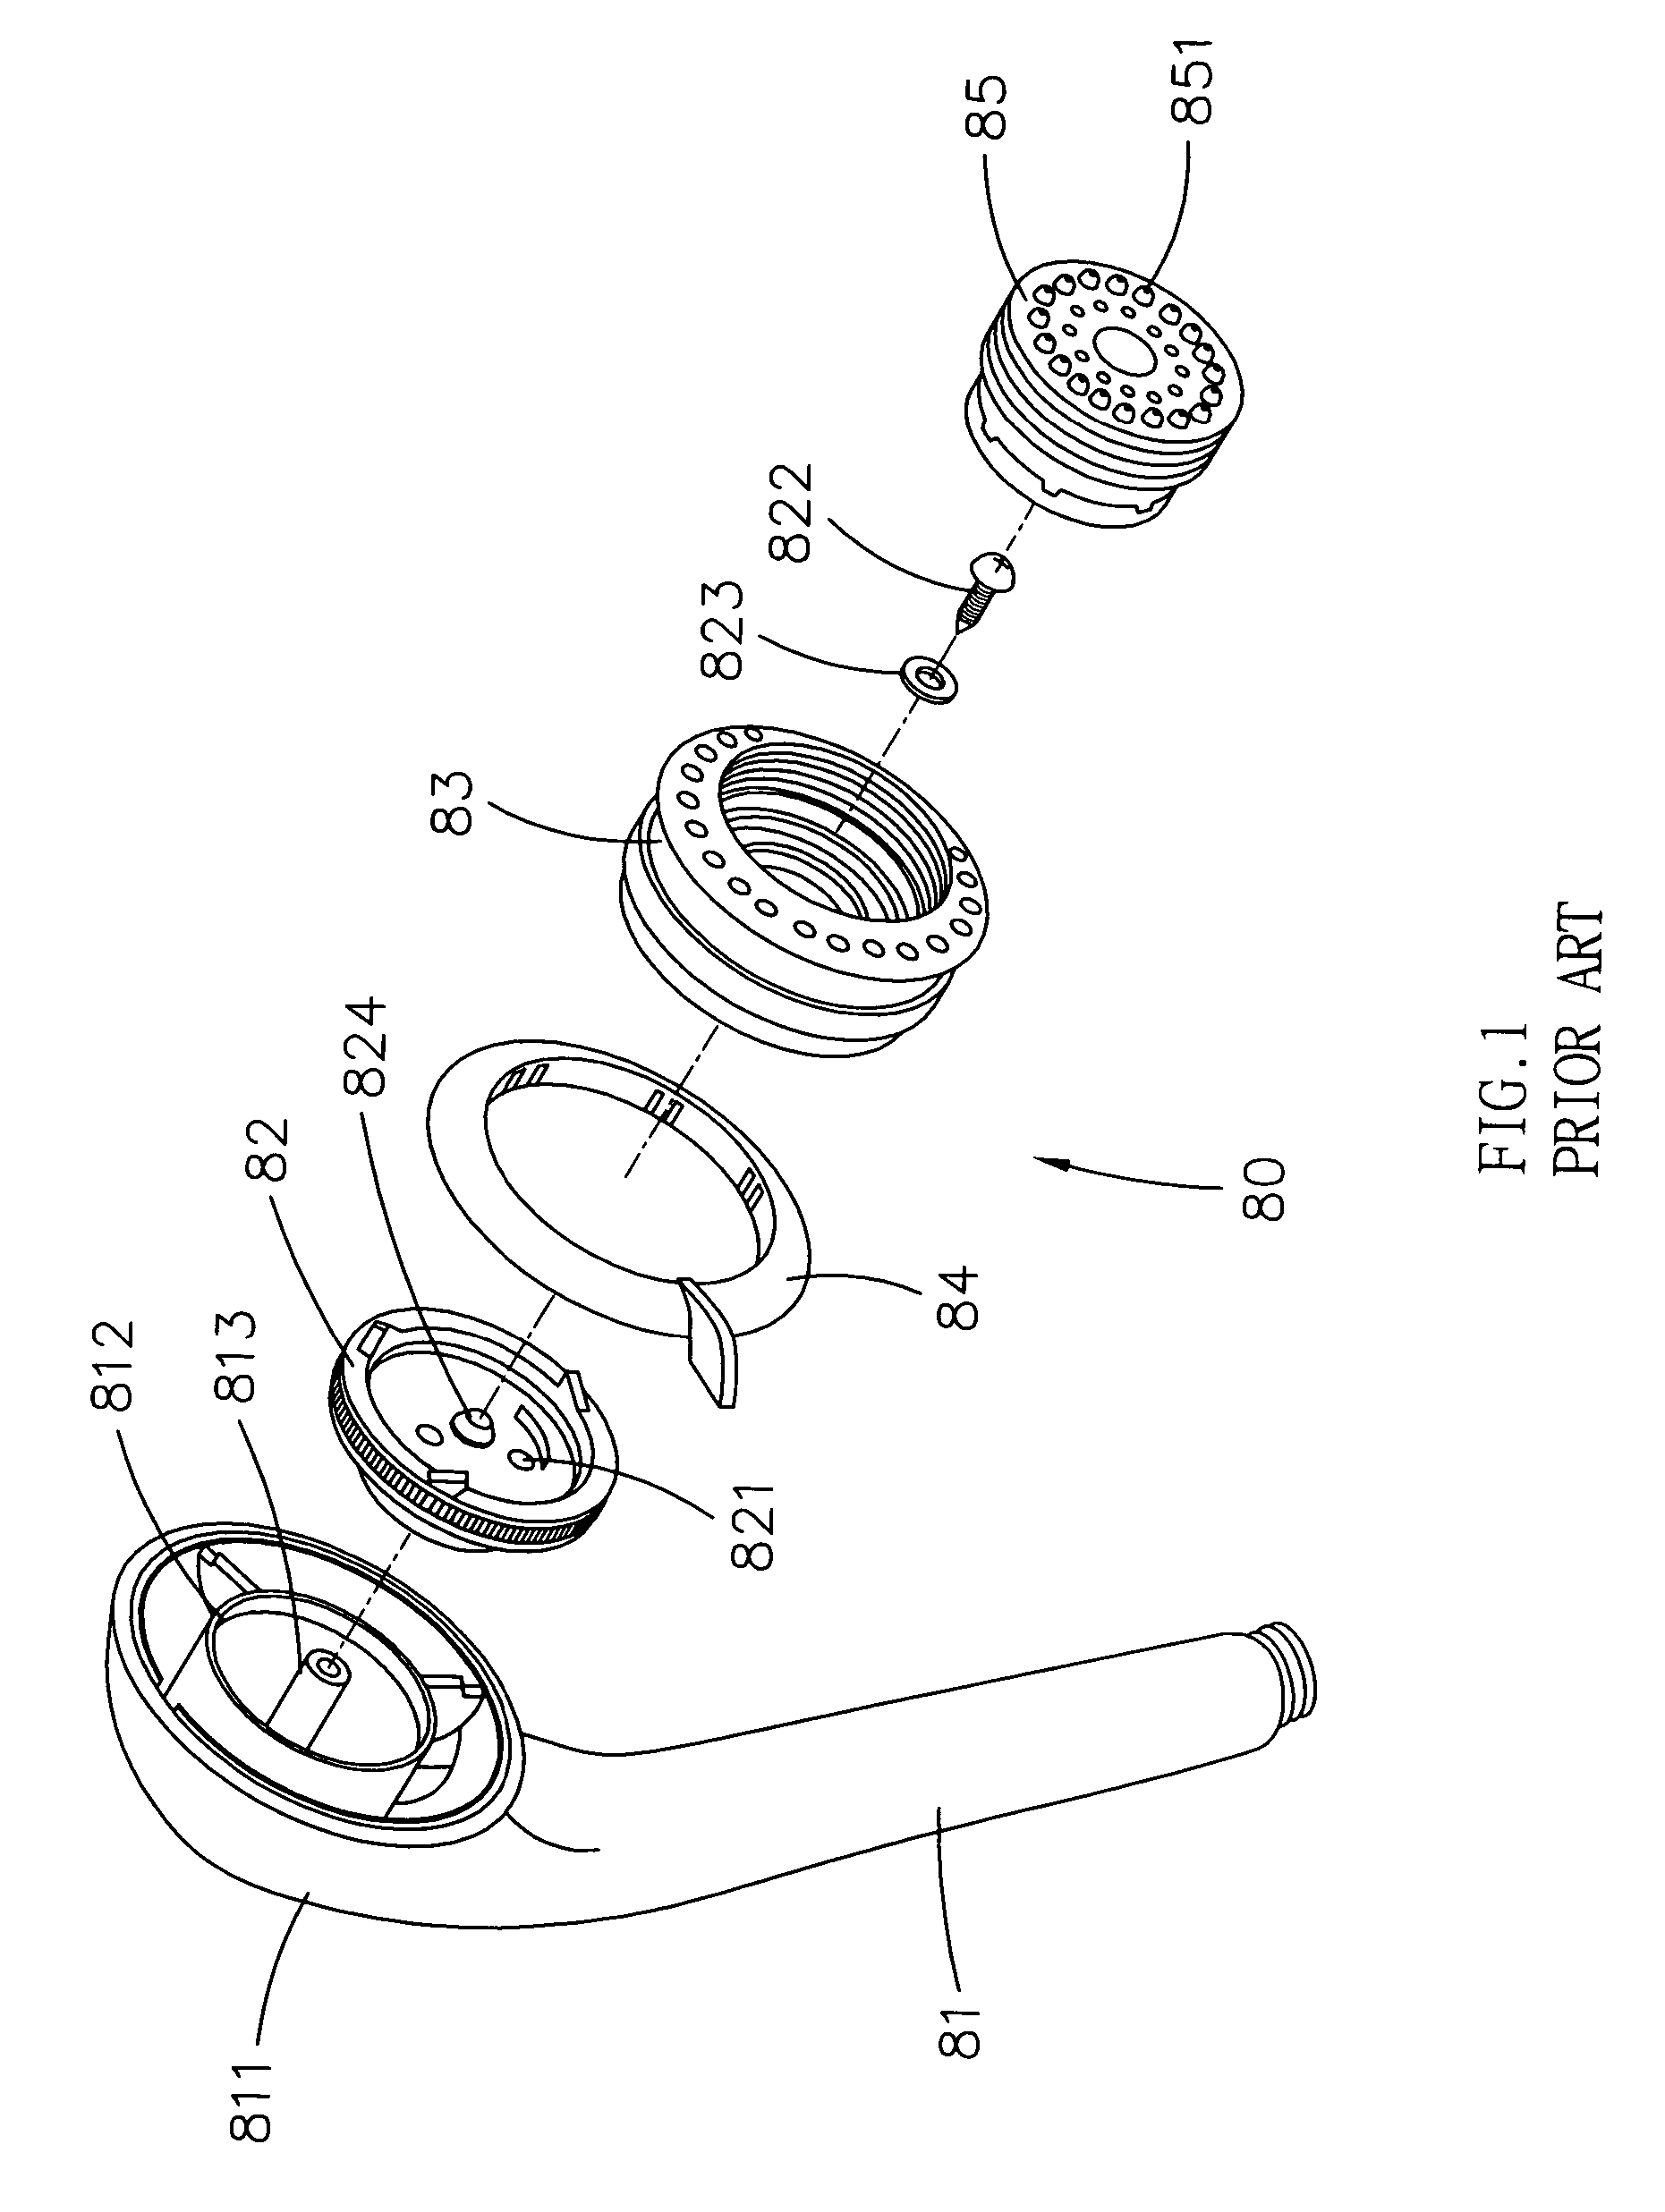 Shower head assembly